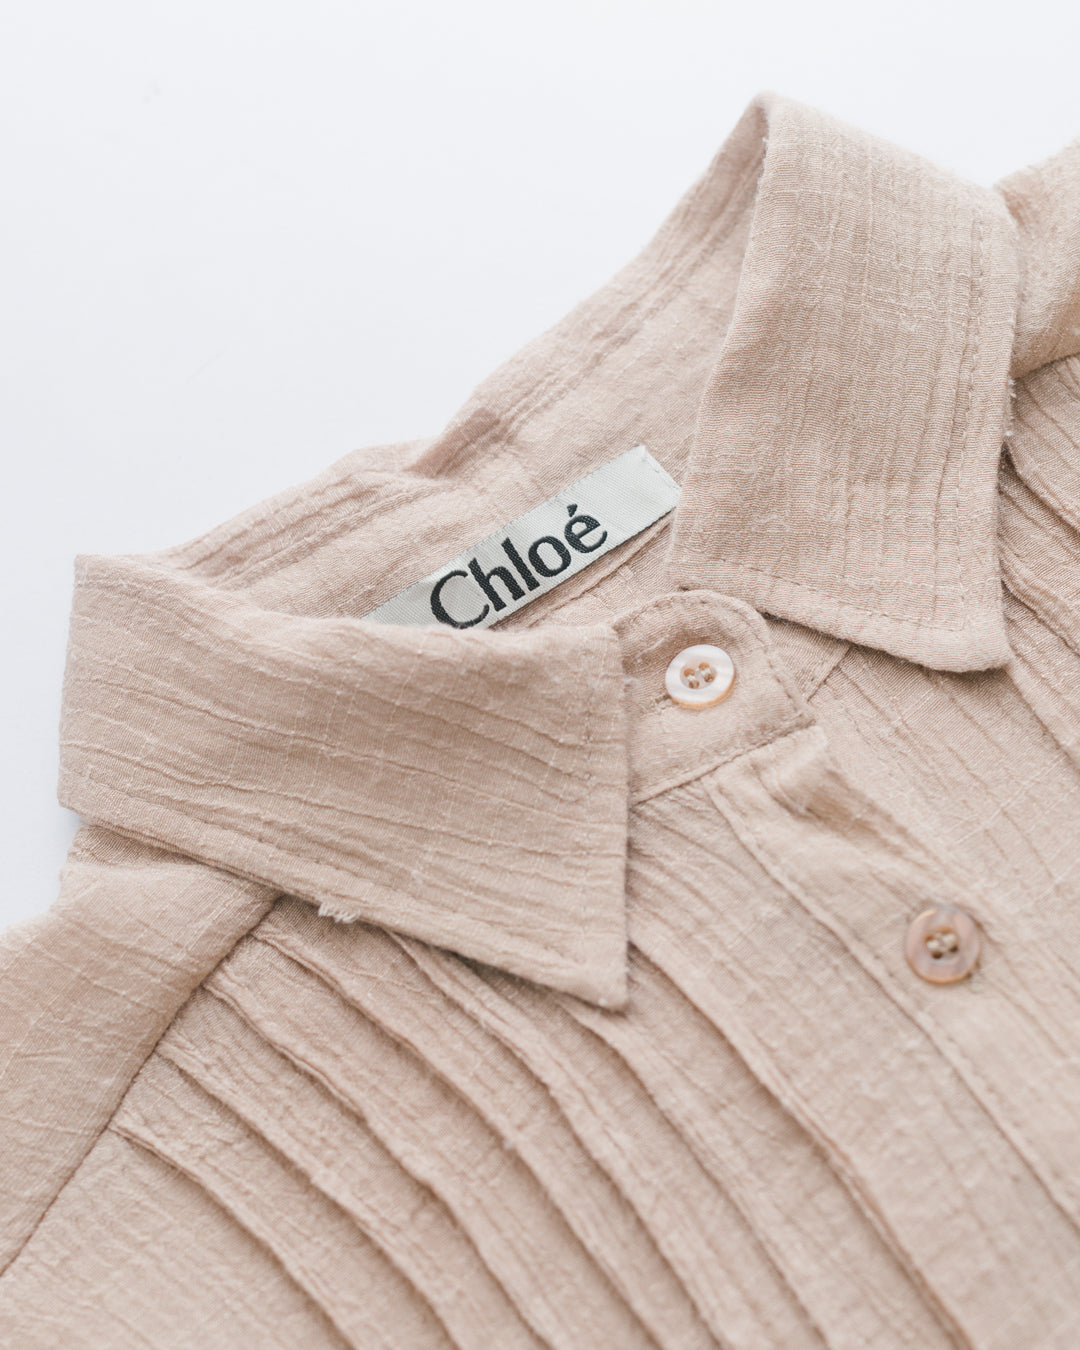 Chloé Pleated Front Long Line Button Down